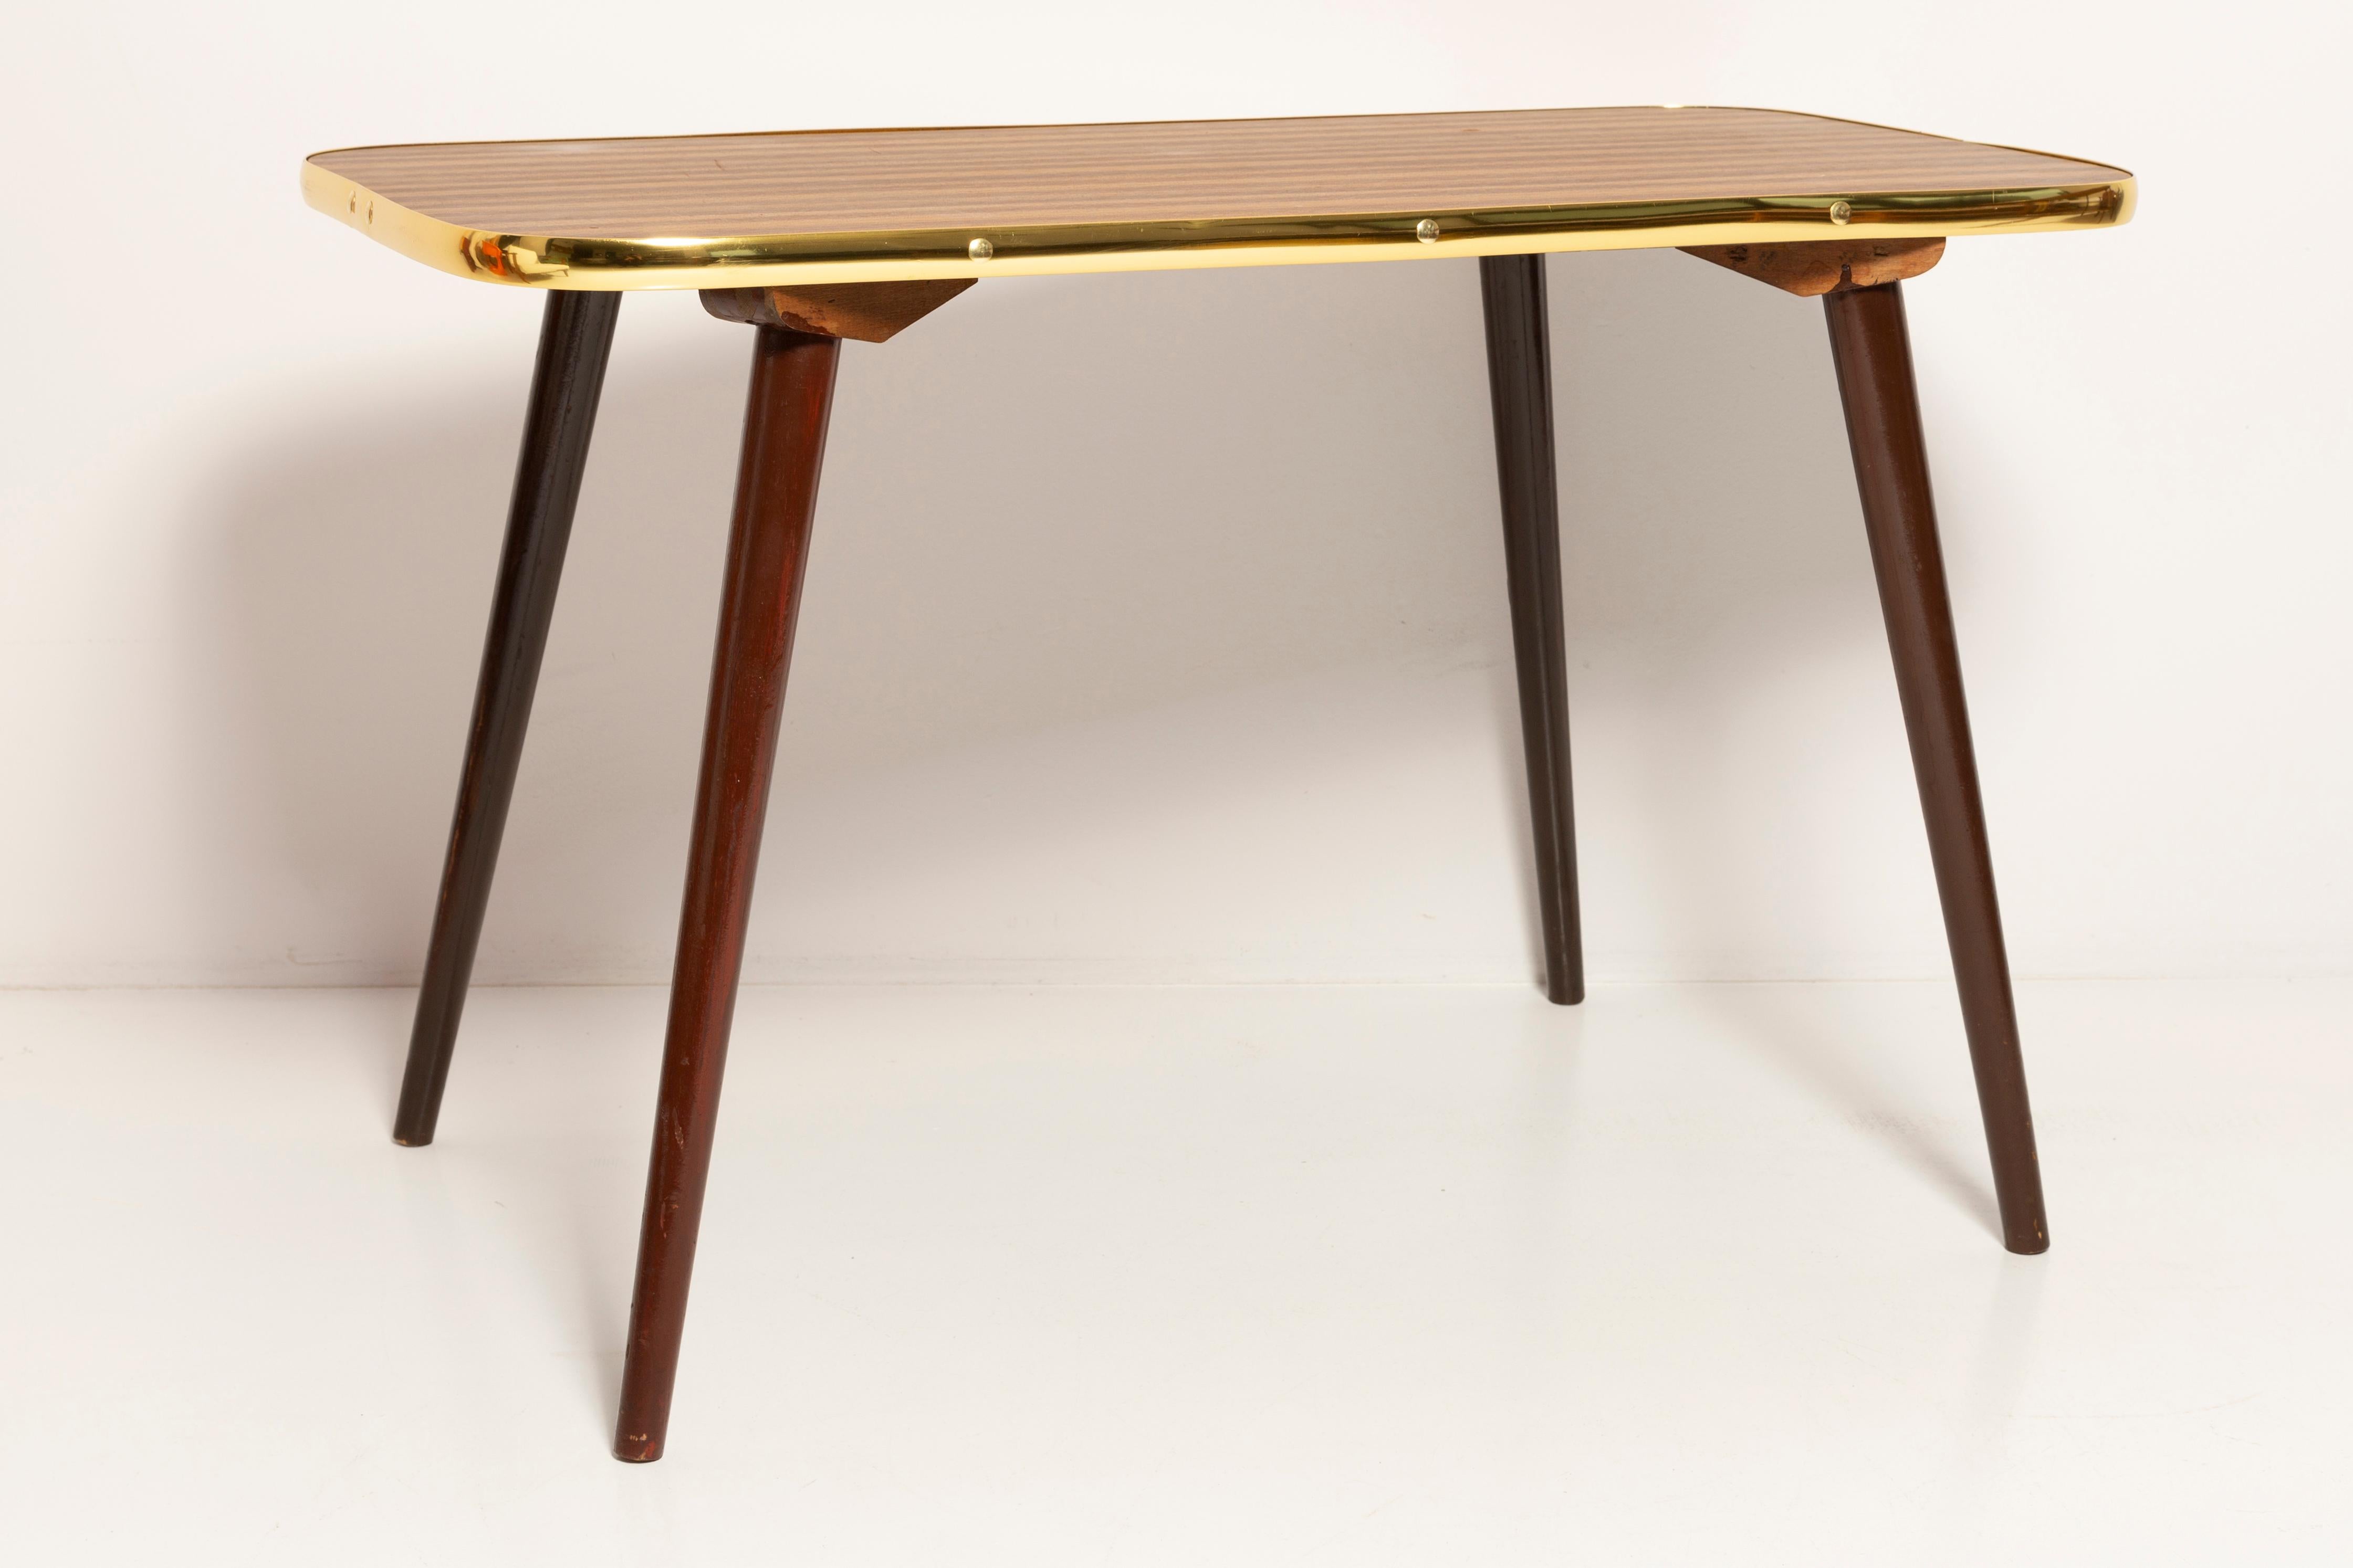 20th Century Mid-Century Modern Coffee Table, Hollywood Regency Style, Wood, Poland, 1960s For Sale